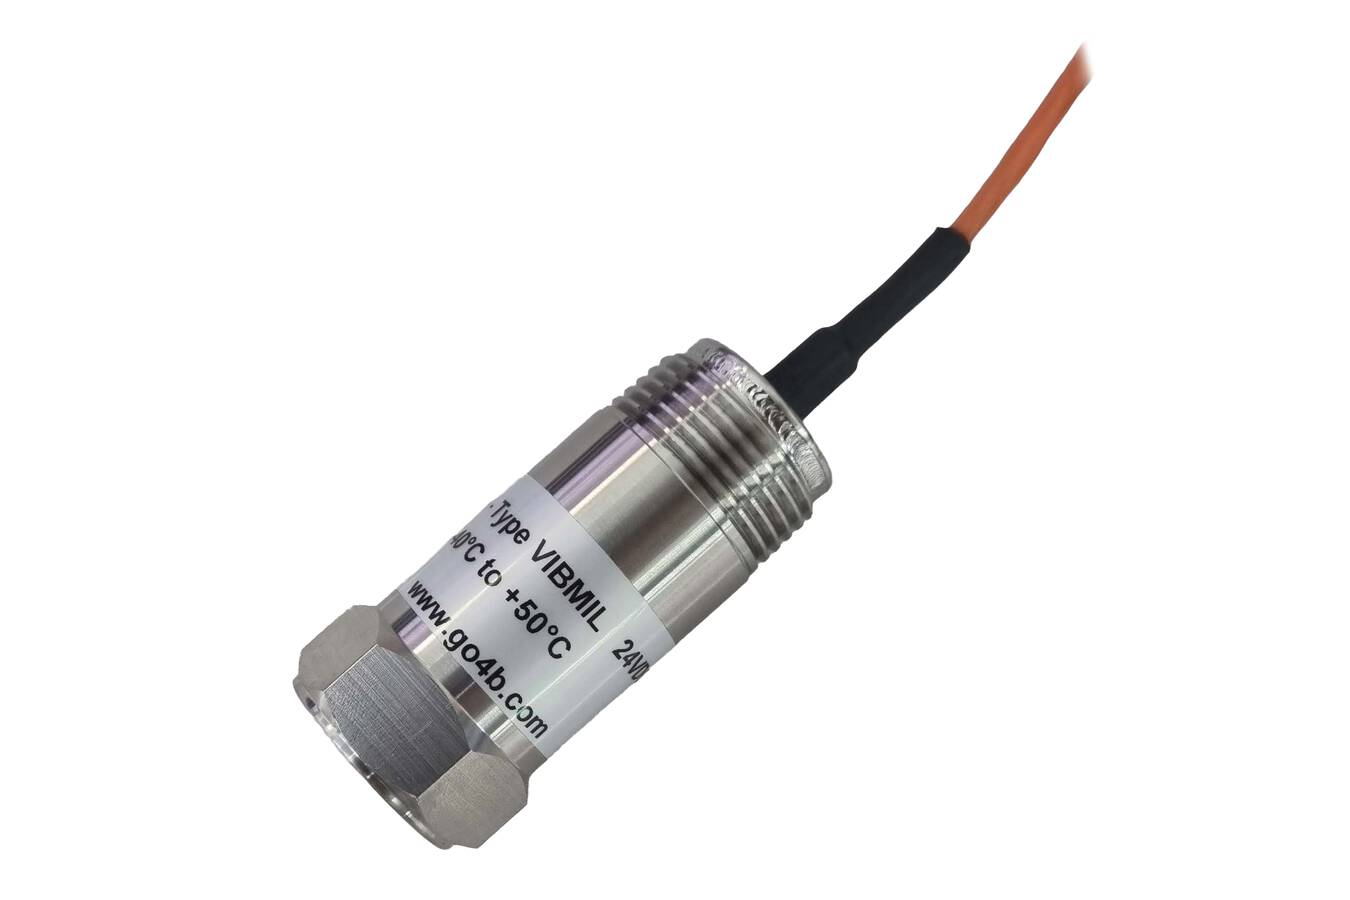 VIBMIL vibration sensor for industrial environments 4B’s Vibmil Vibration Sensor (VIBMIL) is designed for continuous monitoring of vibration levels in industrial environments.